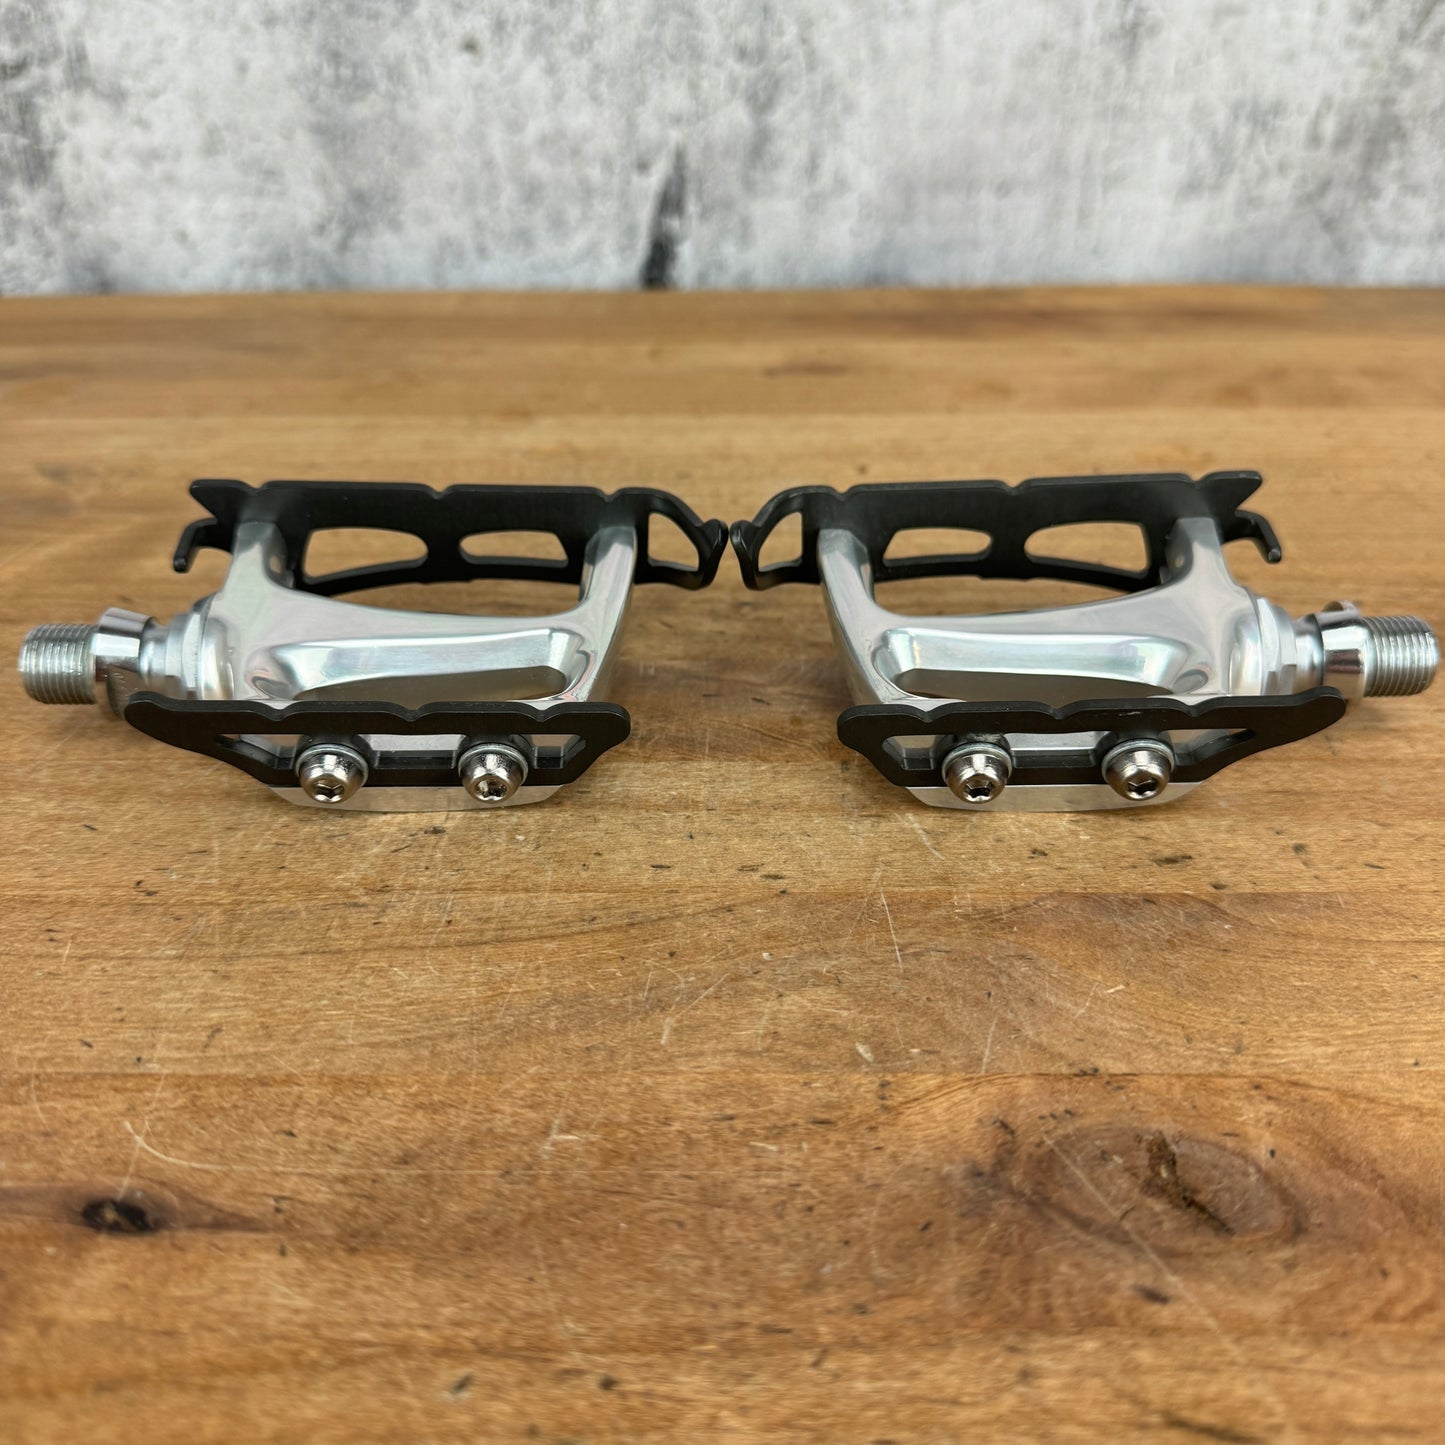 New! Campagnolo 1980s C-Record Quill Triple Bearing Pista 9/16" x 20 Pedals